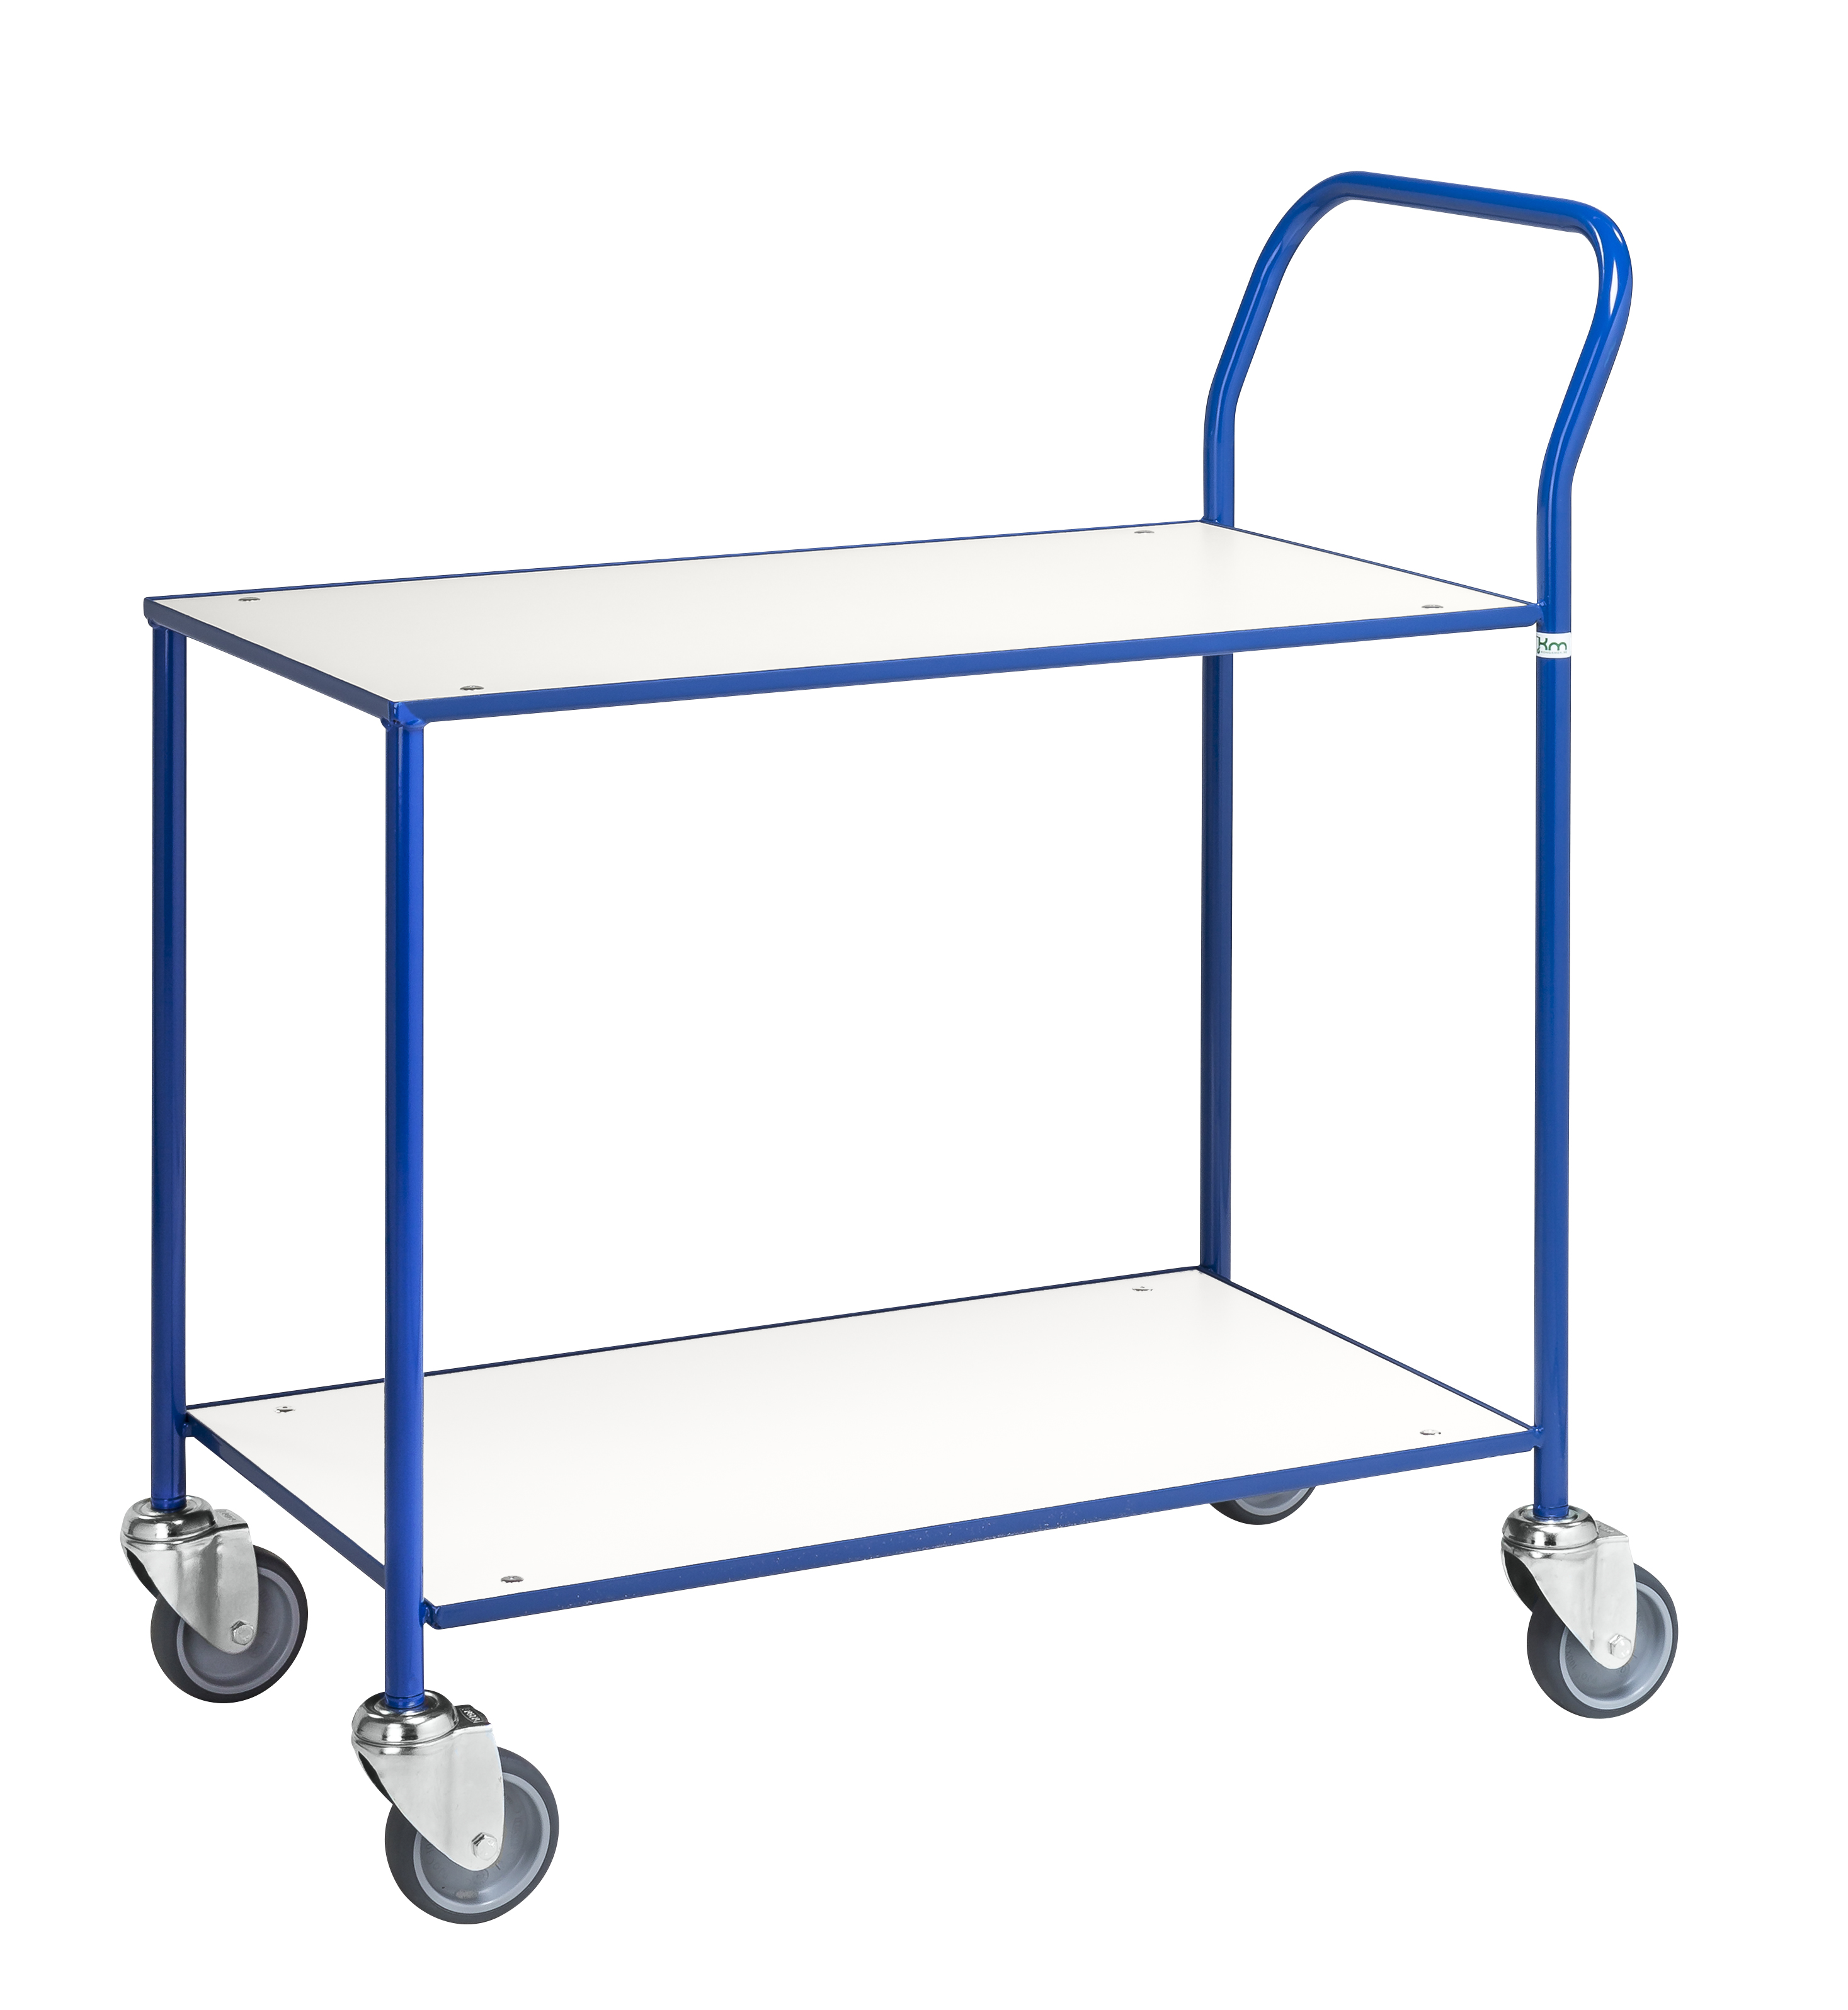 Small table trolley, fully welded KM373-6